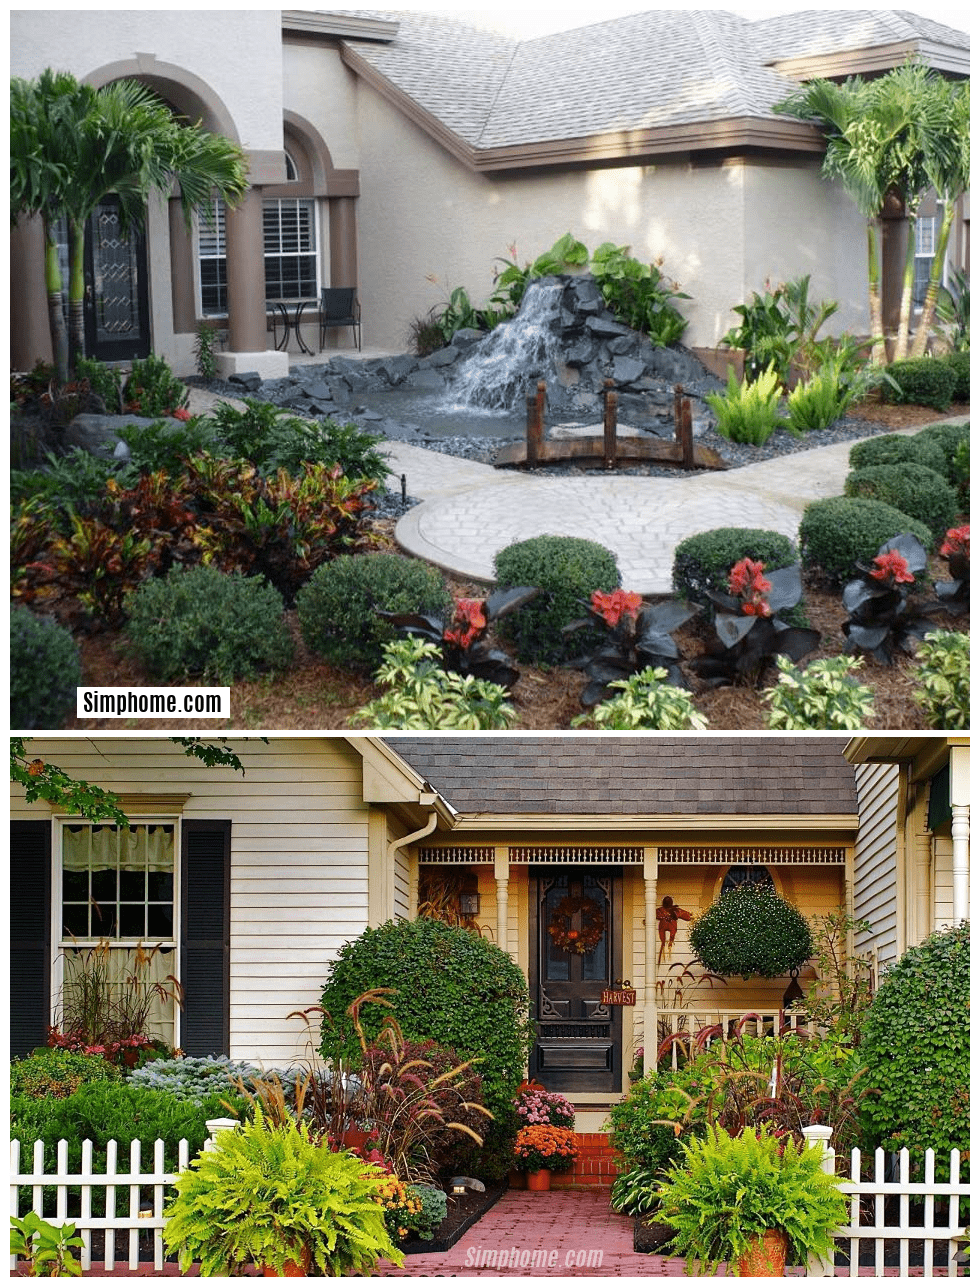 Simphome.com small front yard landscaping ideas from youtube inside gardening ideas for front yard.jpg